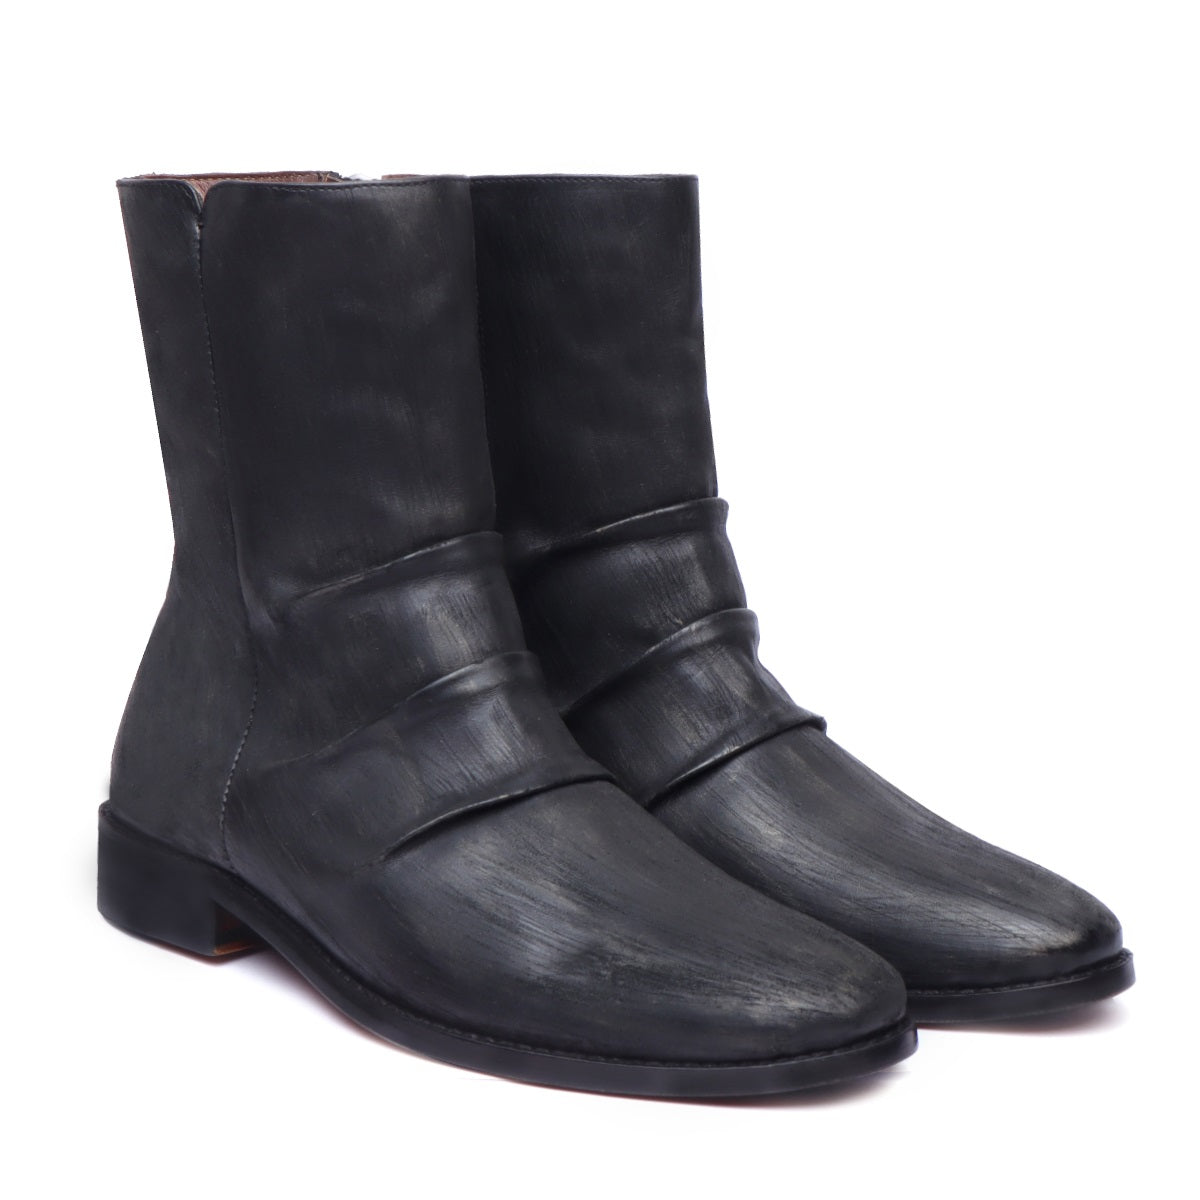 Dual Tone Black Grey Hand Painted Genuine Leather With Zip Closure Men's Chelsea Boots By Brune & Bareskin